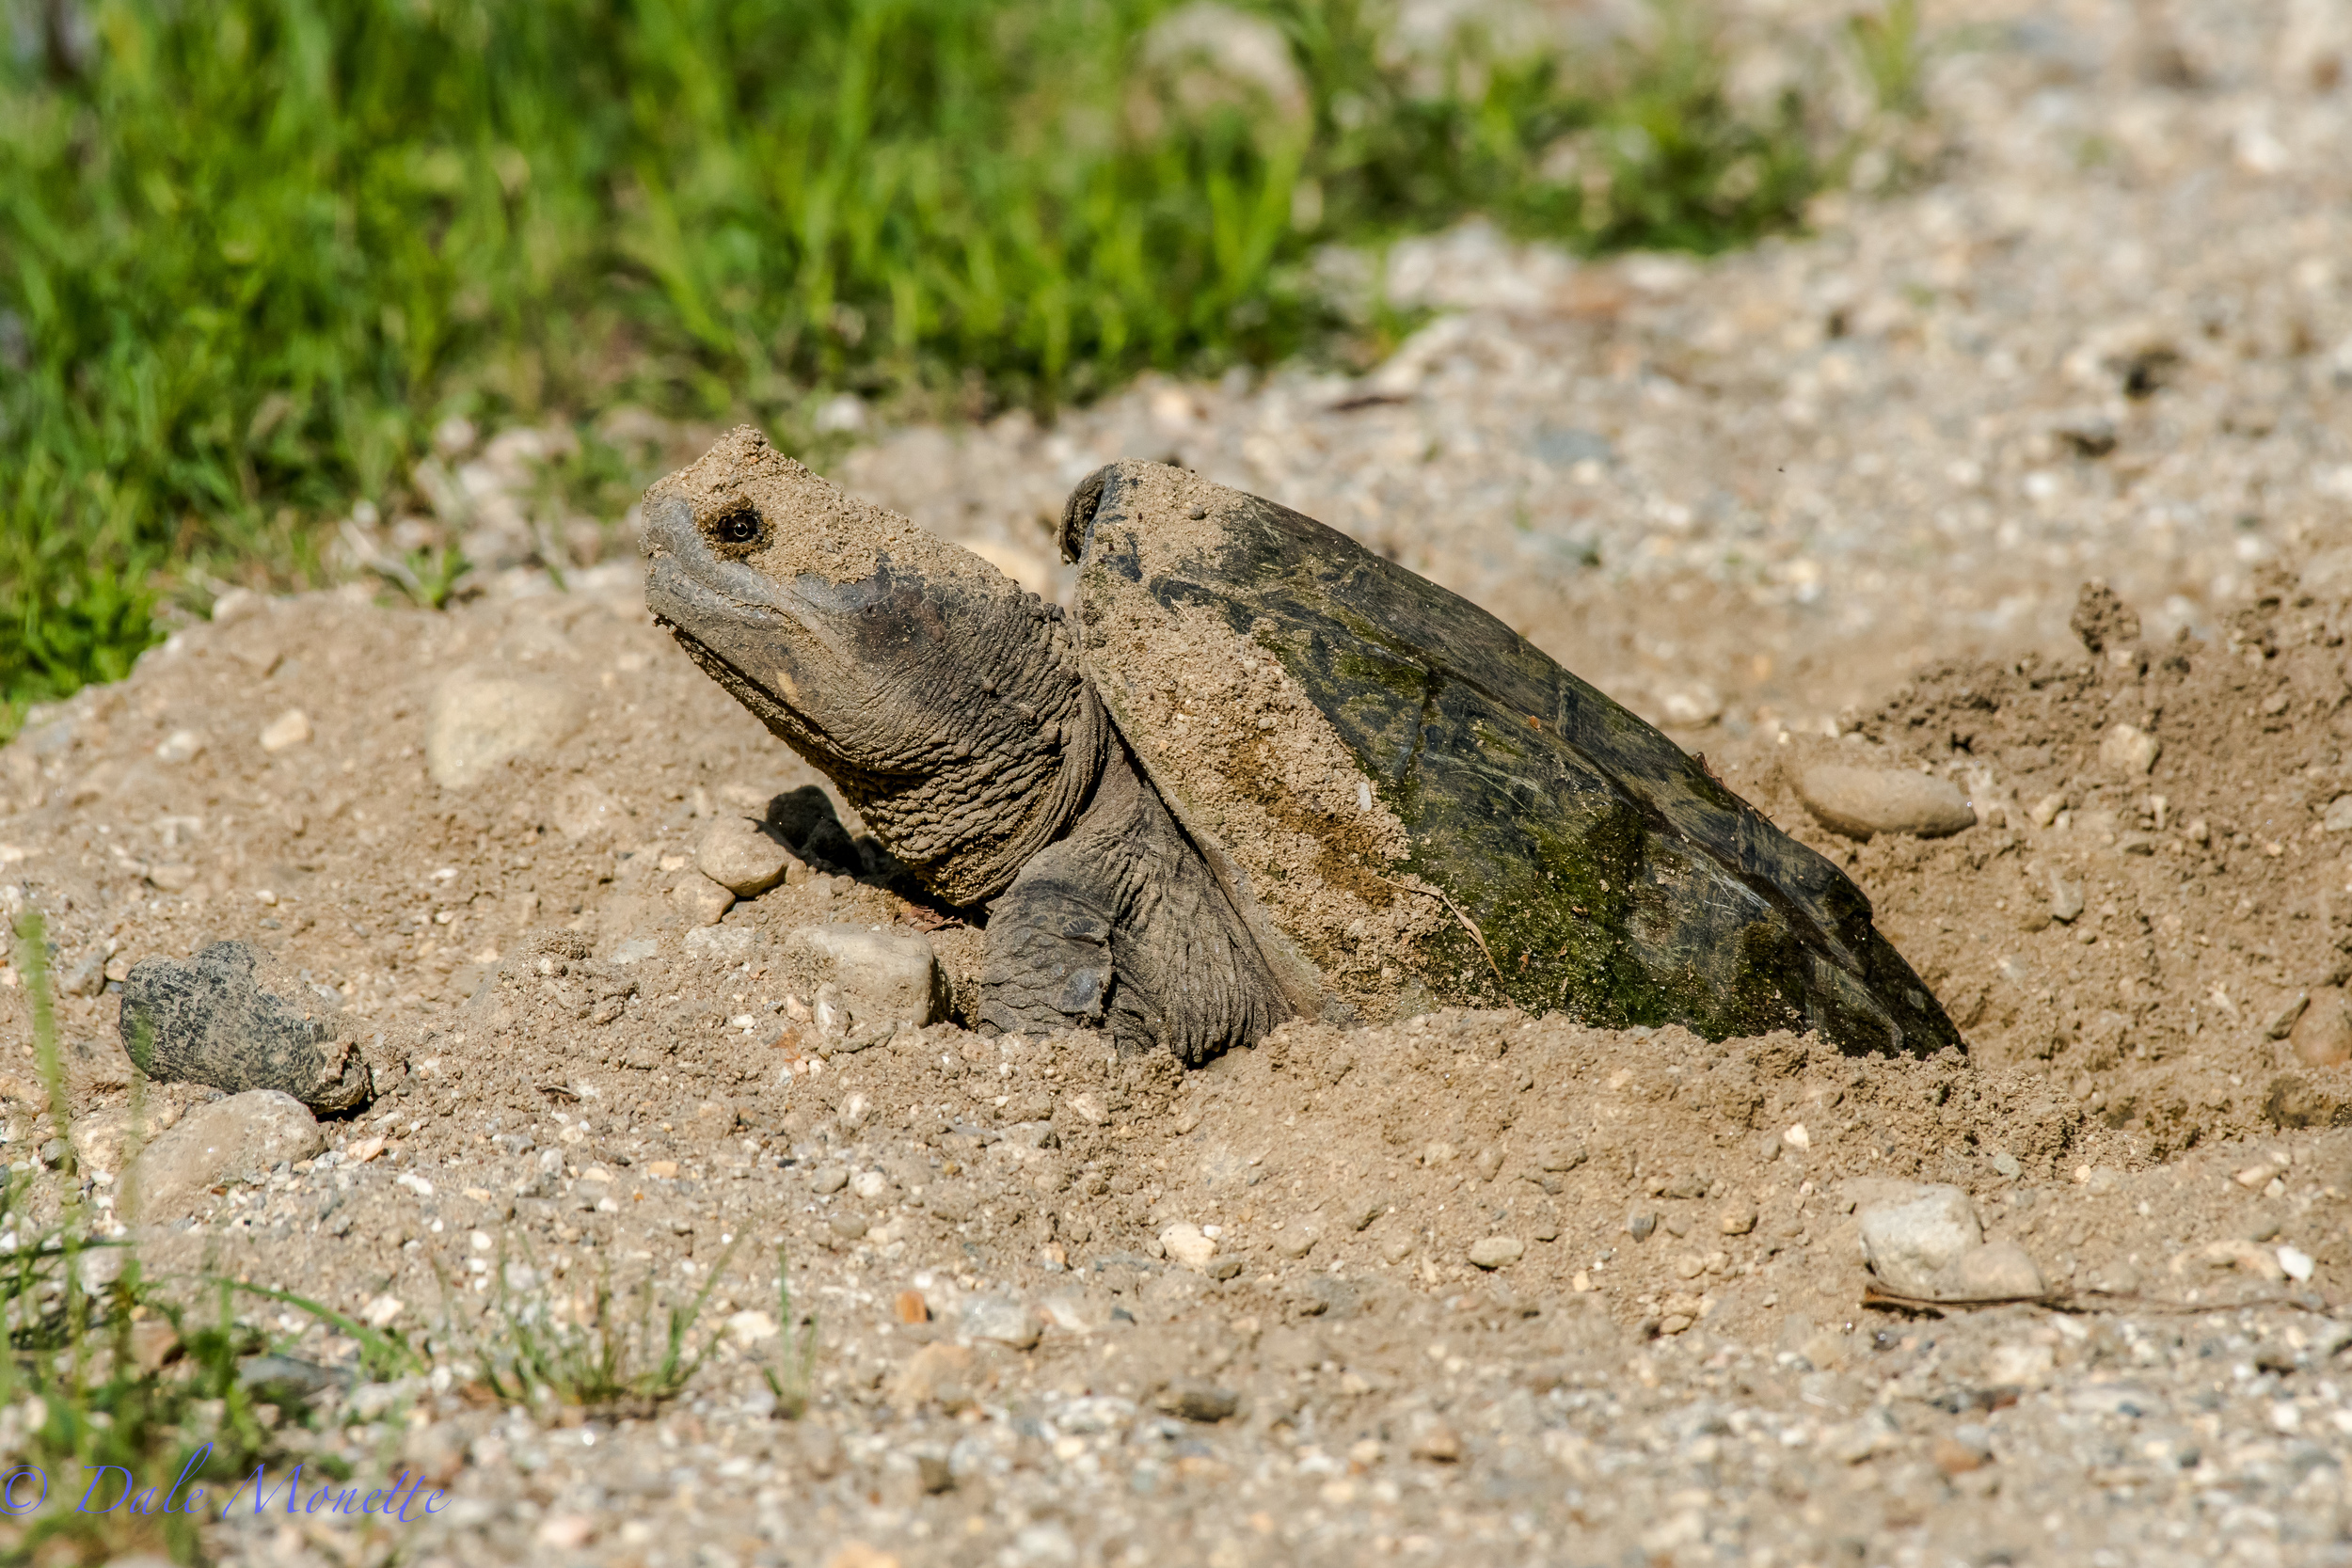   She looks prehistoric huh ? &nbsp; A female snapping turtle laying her eggs along the shore of the Quabbin Reservoir on June 1st. &nbsp;Lots of turtles out laying eggs as happens each June. &nbsp;Watch out when driving for turtles on the roads arou